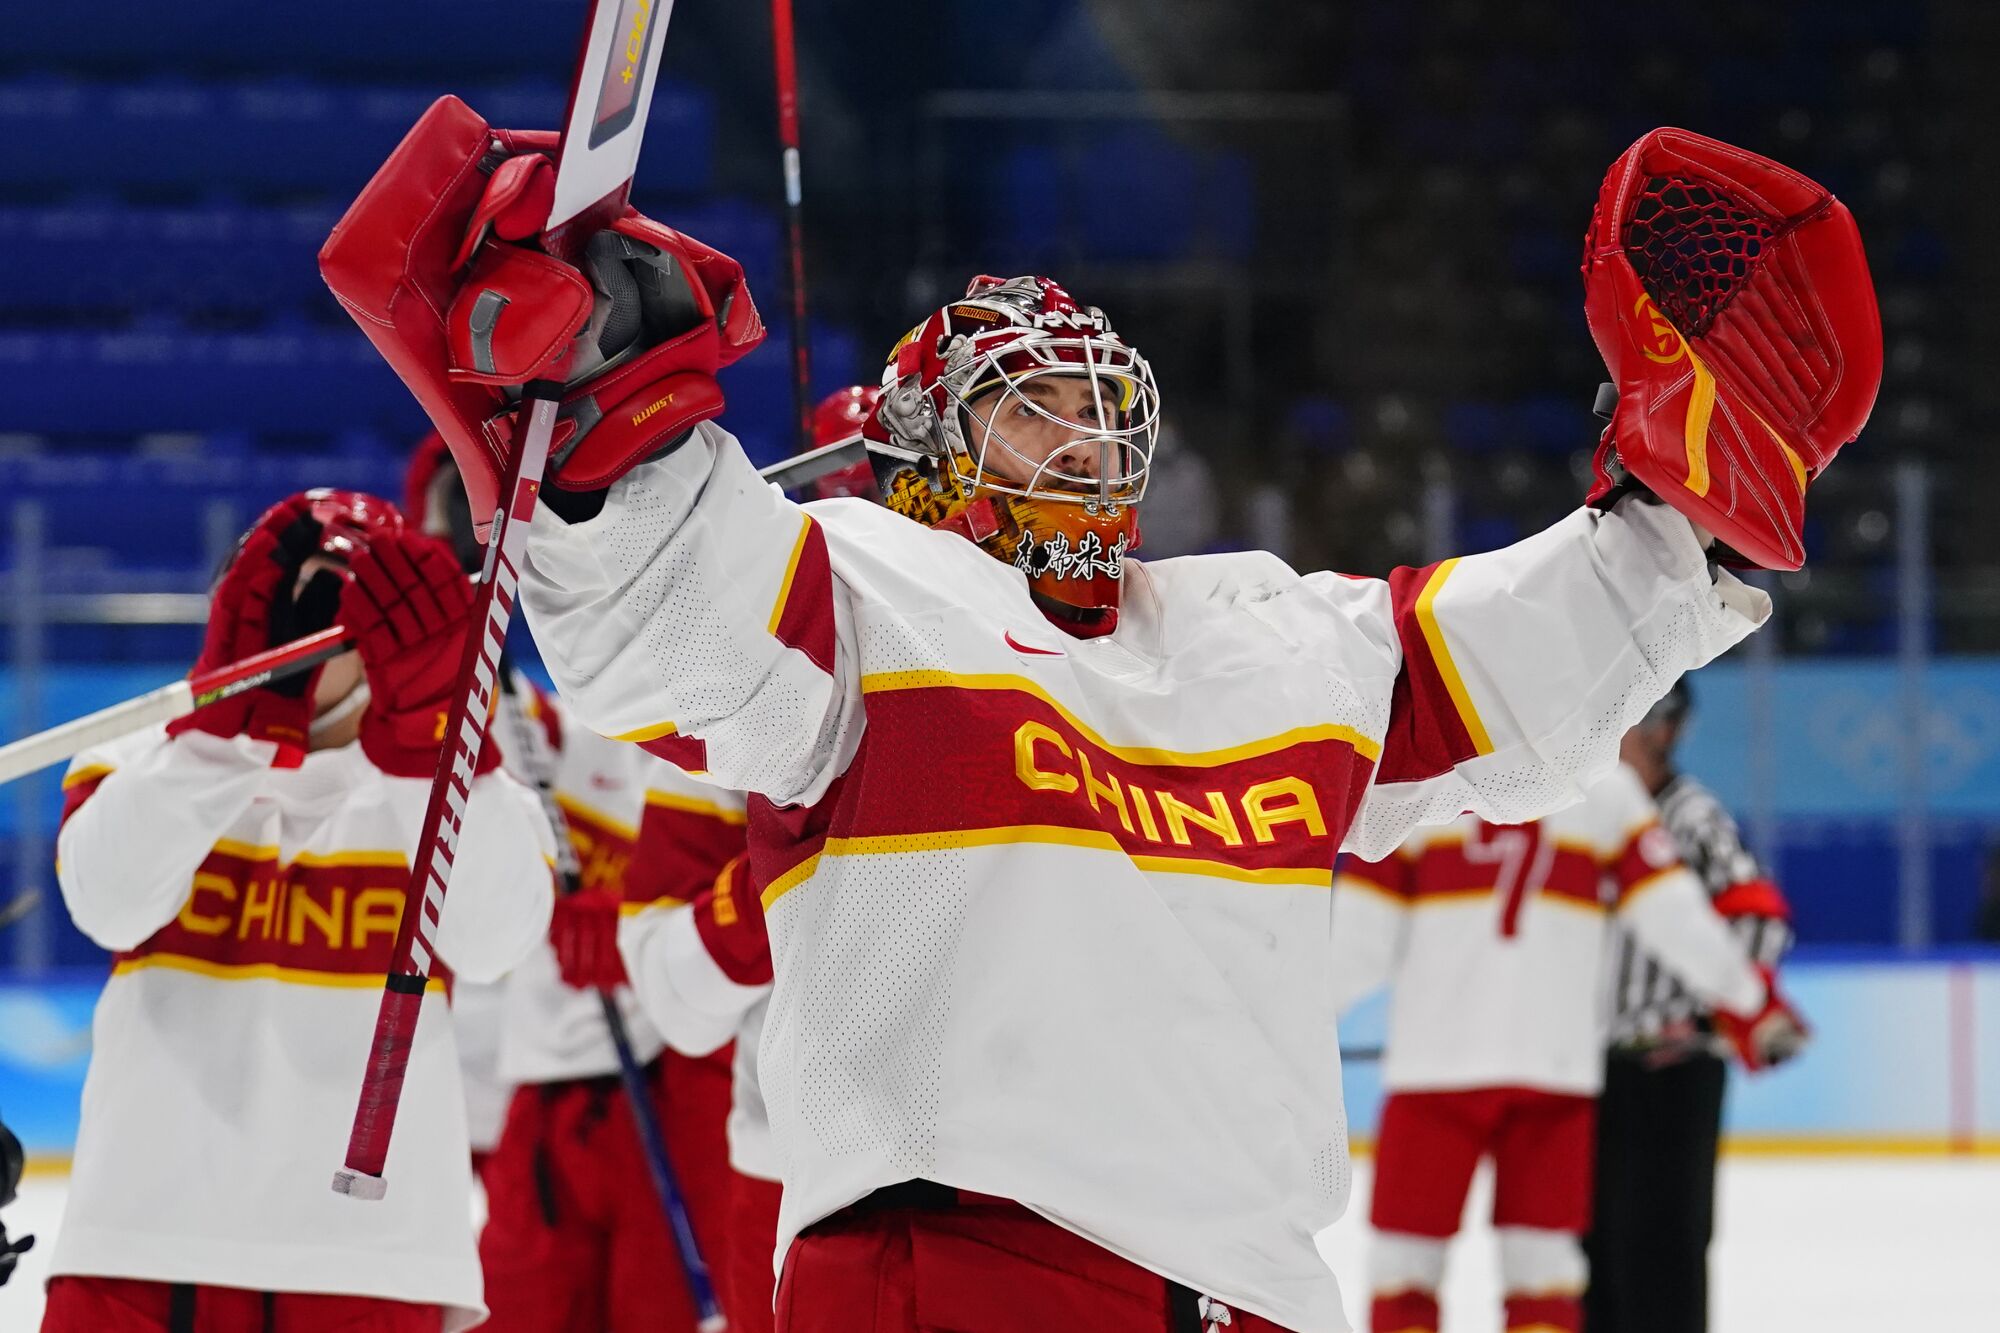 China goalkeeper Jieruimi Shimisi (Jeremy Smith) waves to fans after a game against Germany on Saturday.